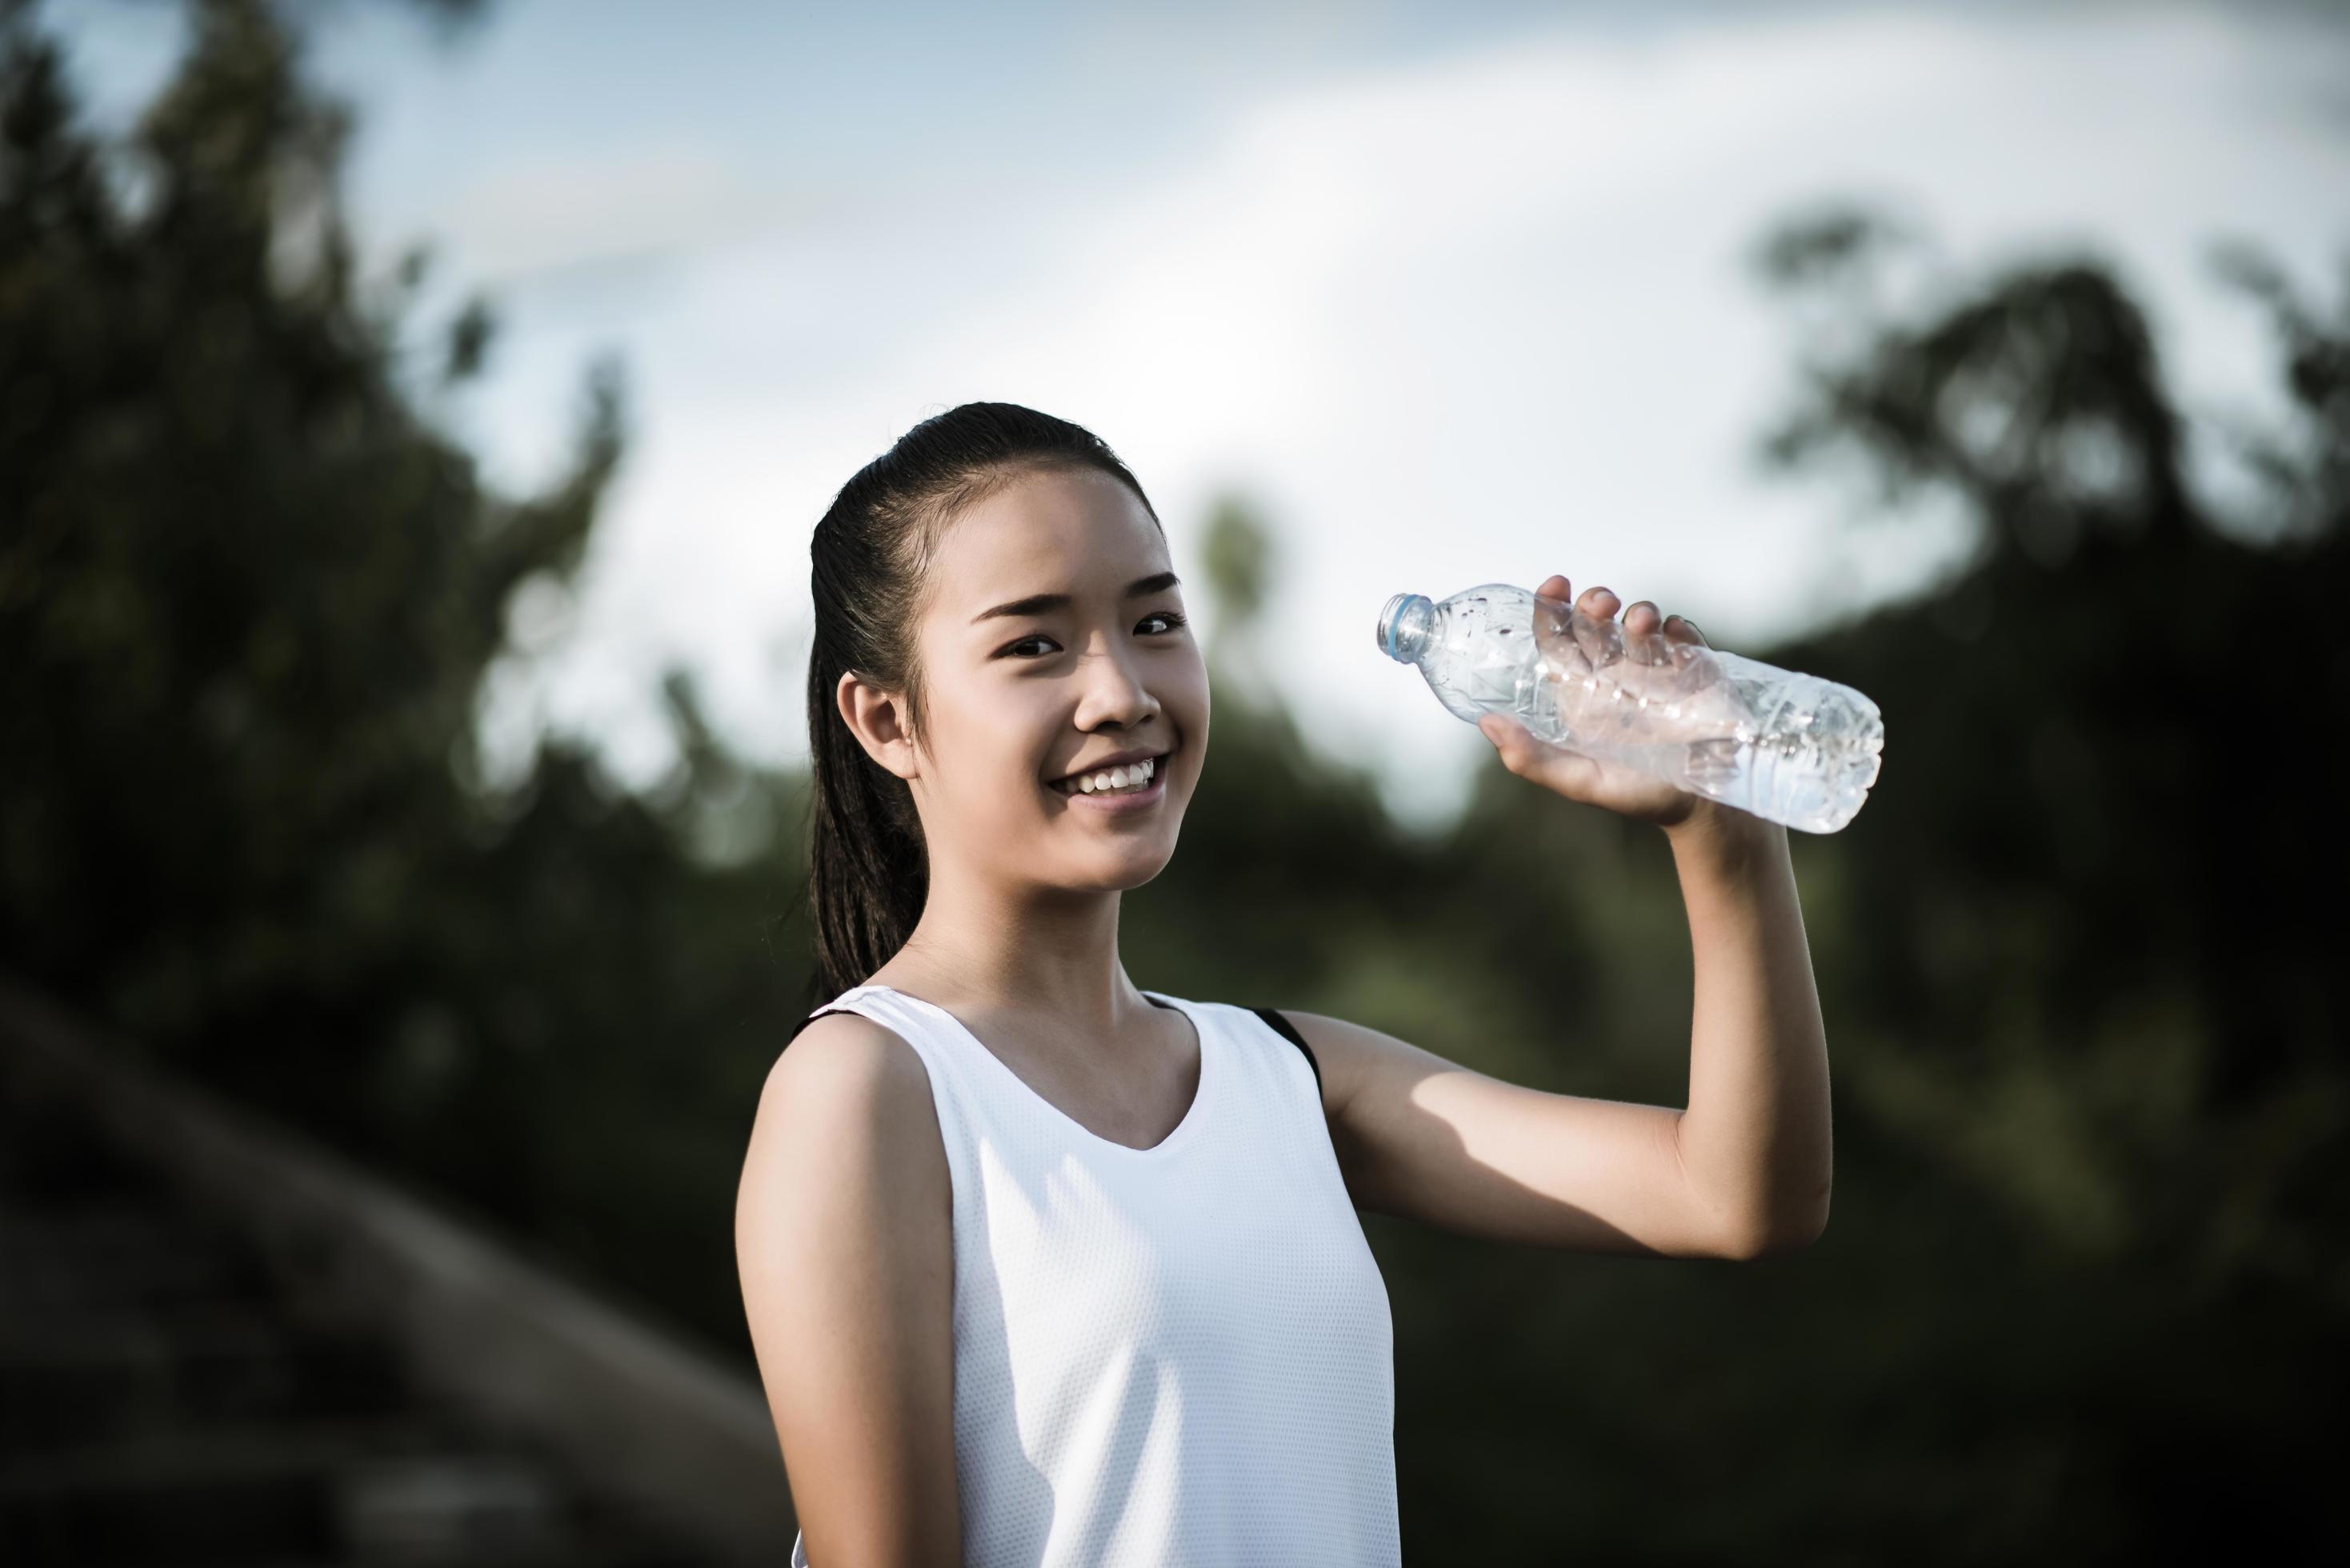 https://static.vecteezy.com/system/resources/previews/001/900/405/large_2x/young-fitness-teen-holding-water-bottle-after-running-exercise-free-photo.jpg